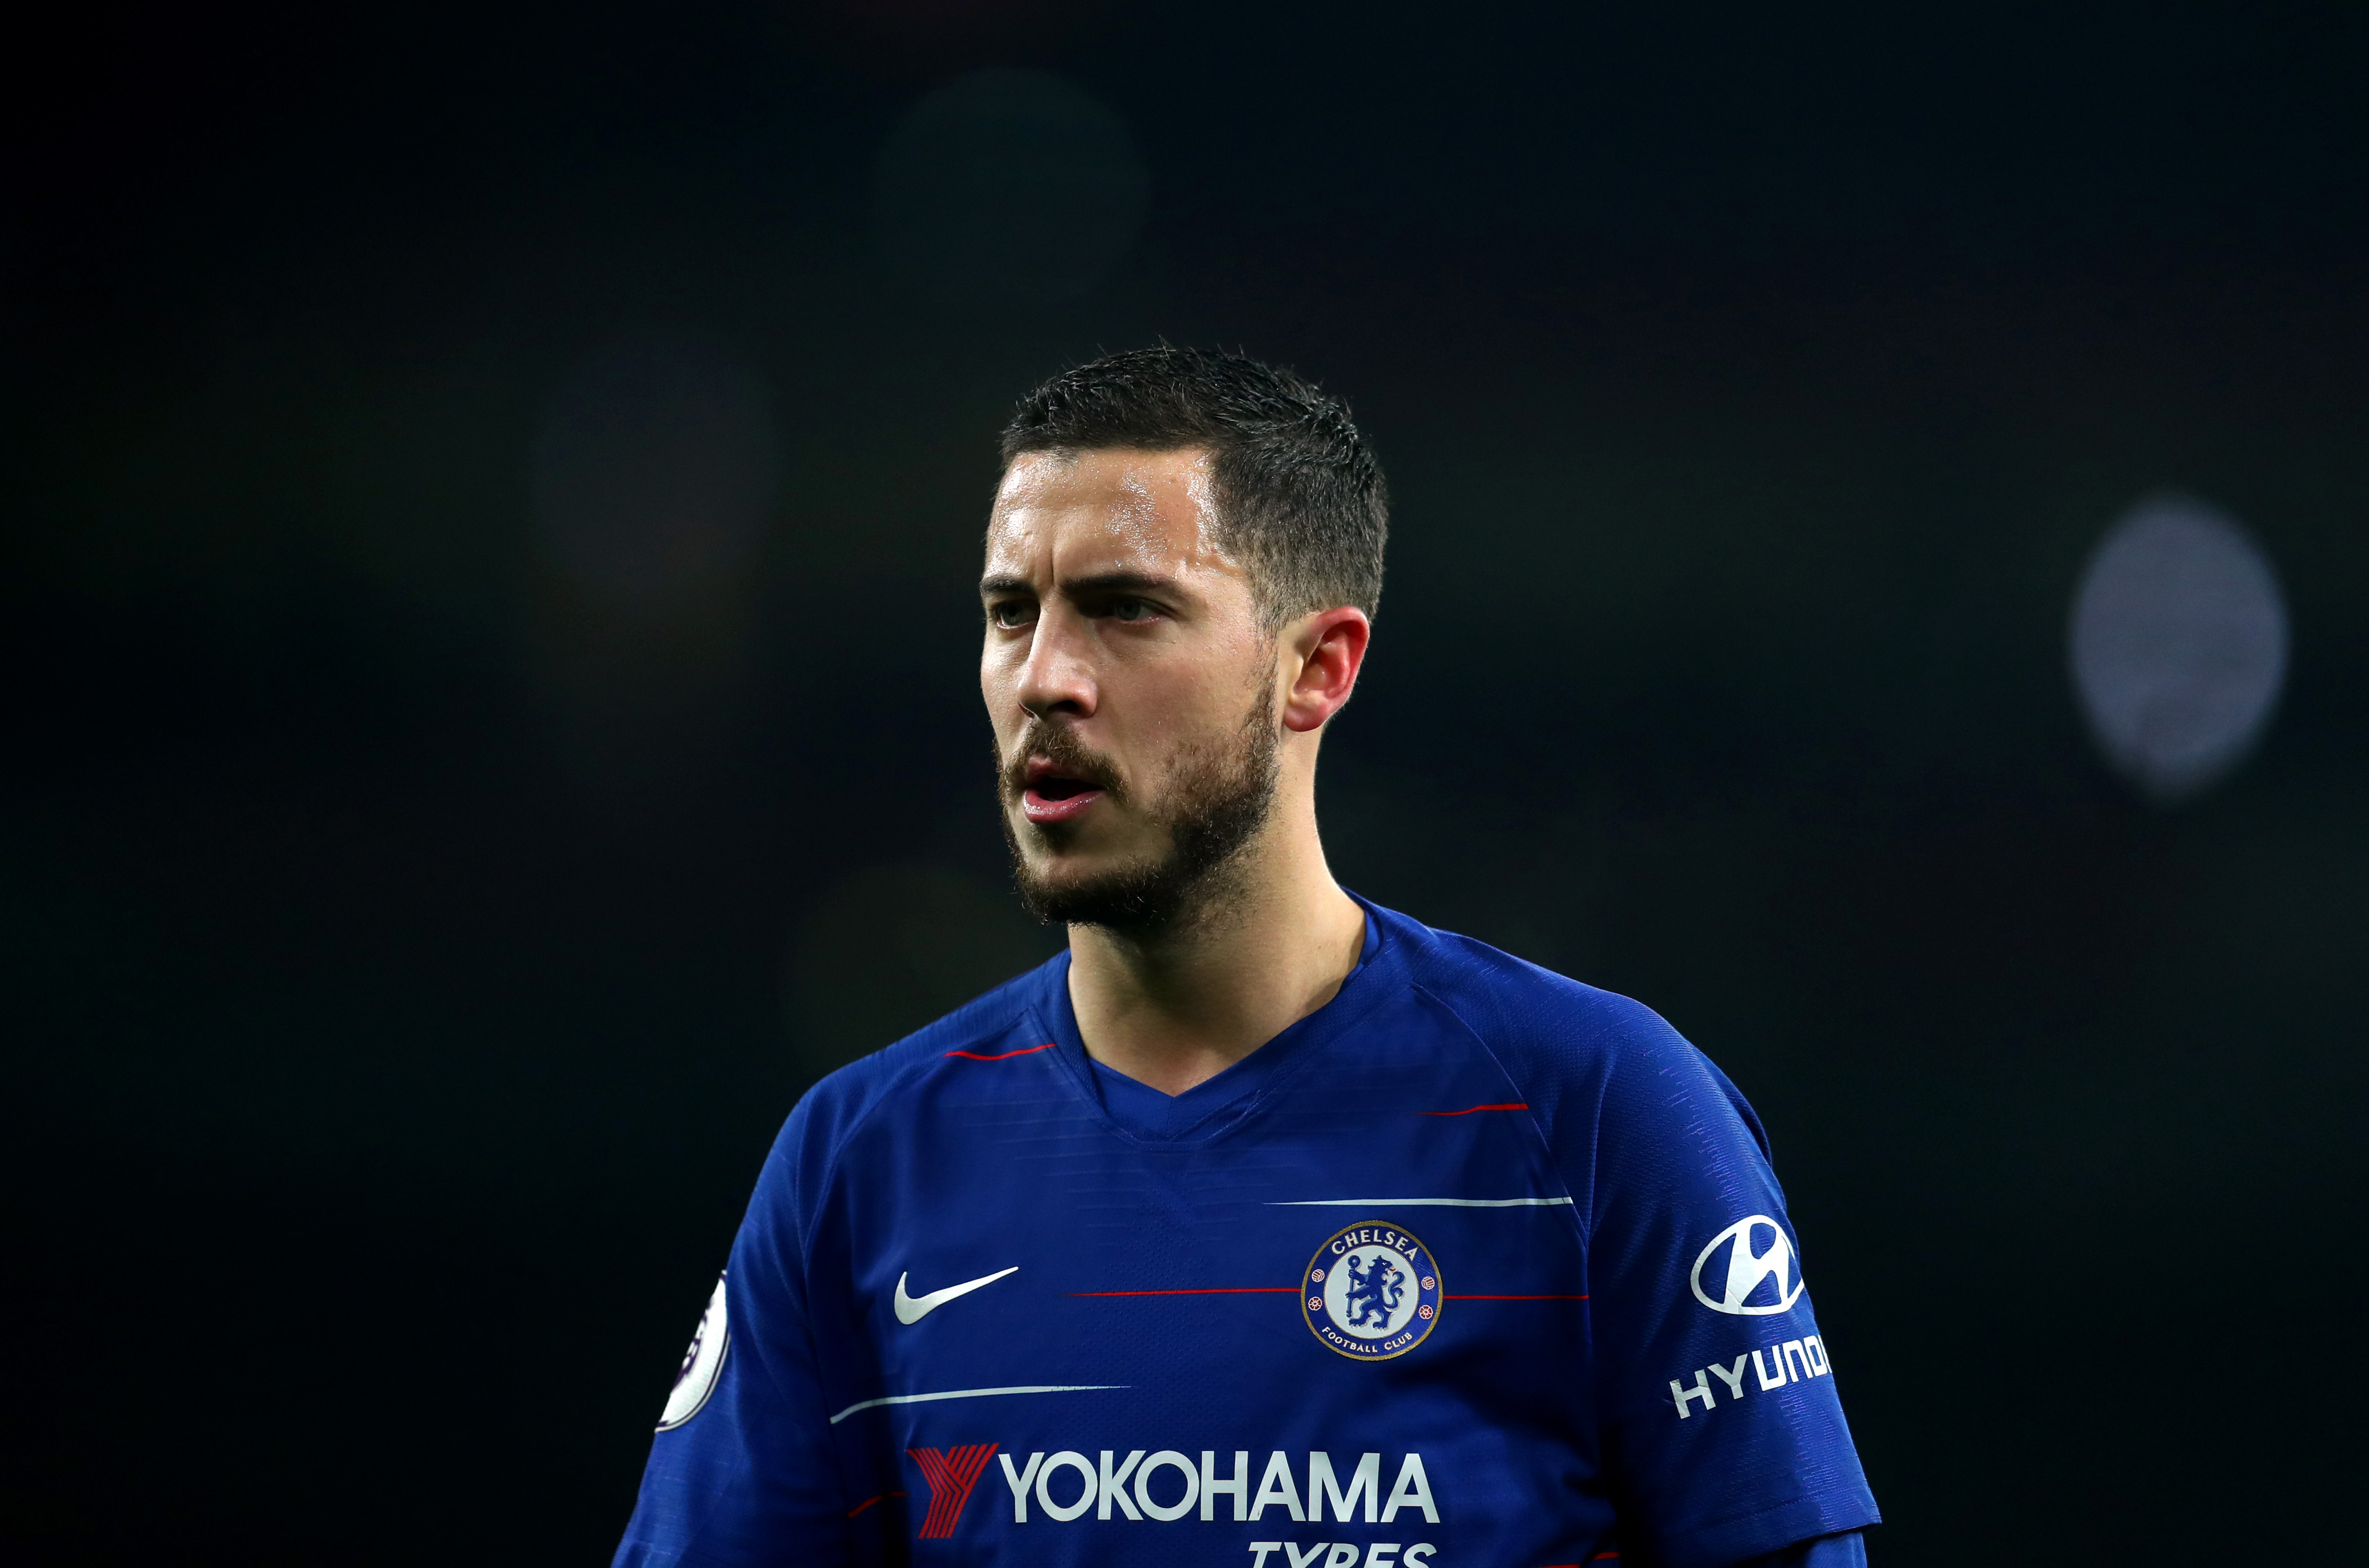 LONDON, ENGLAND - JANUARY 19: Eden Hazard of Chelseaduring the Premier League match between Arsenal FC and Chelsea FC at Emirates Stadium on January 19, 2019 in London, United Kingdom. (Photo by Catherine Ivill/Getty Images)